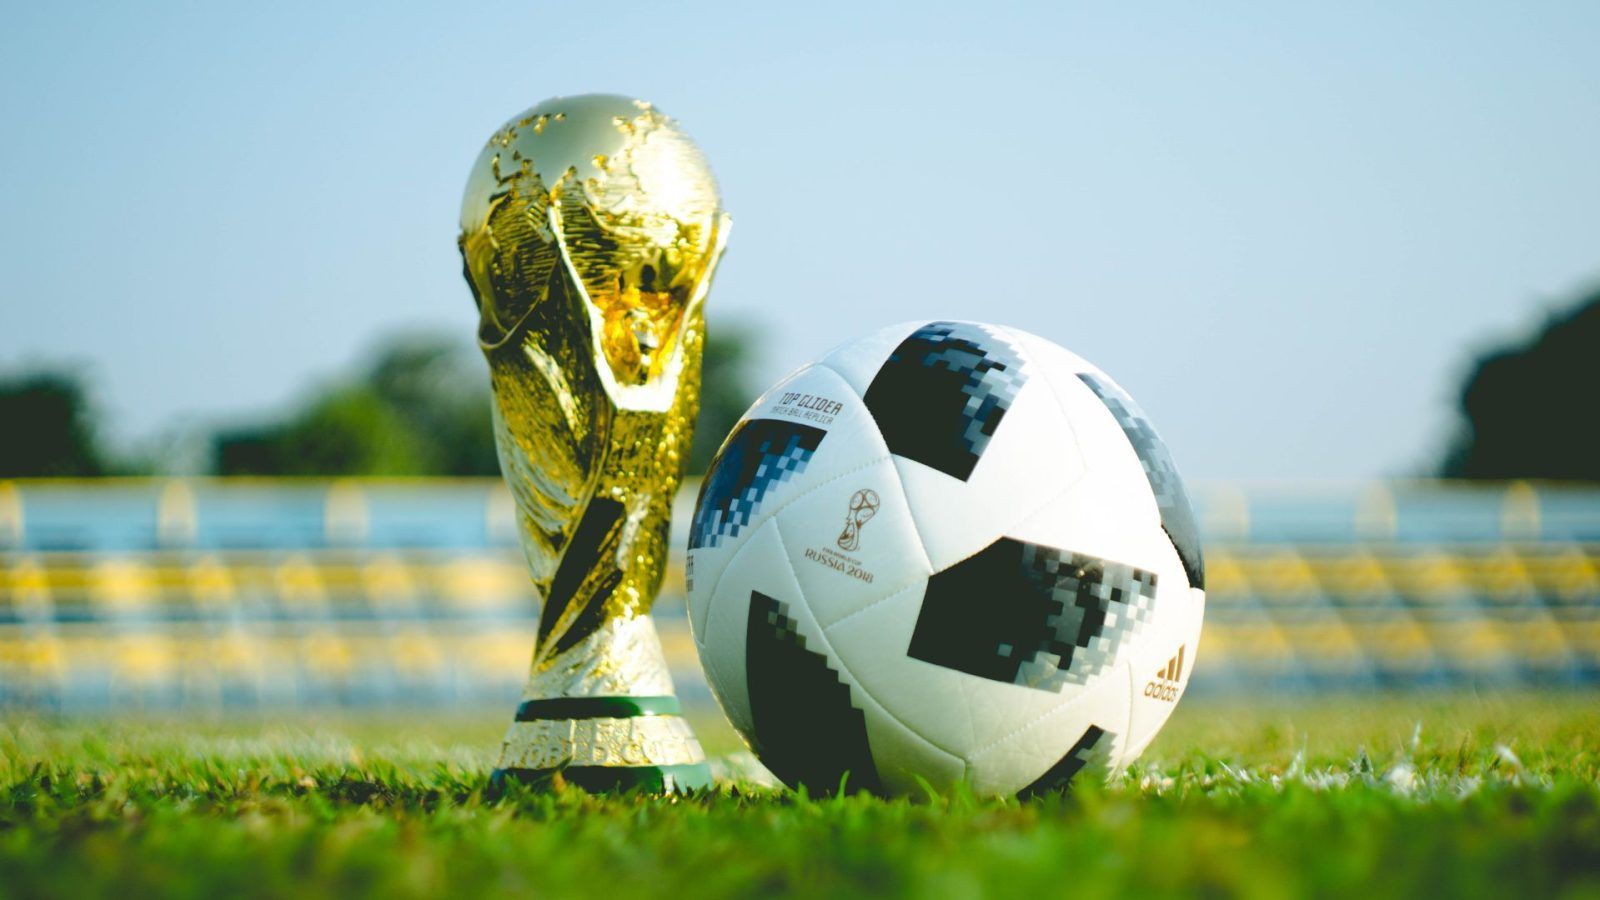 FIFA World Cup Sports bars in Delhi-NCR that are screening matches